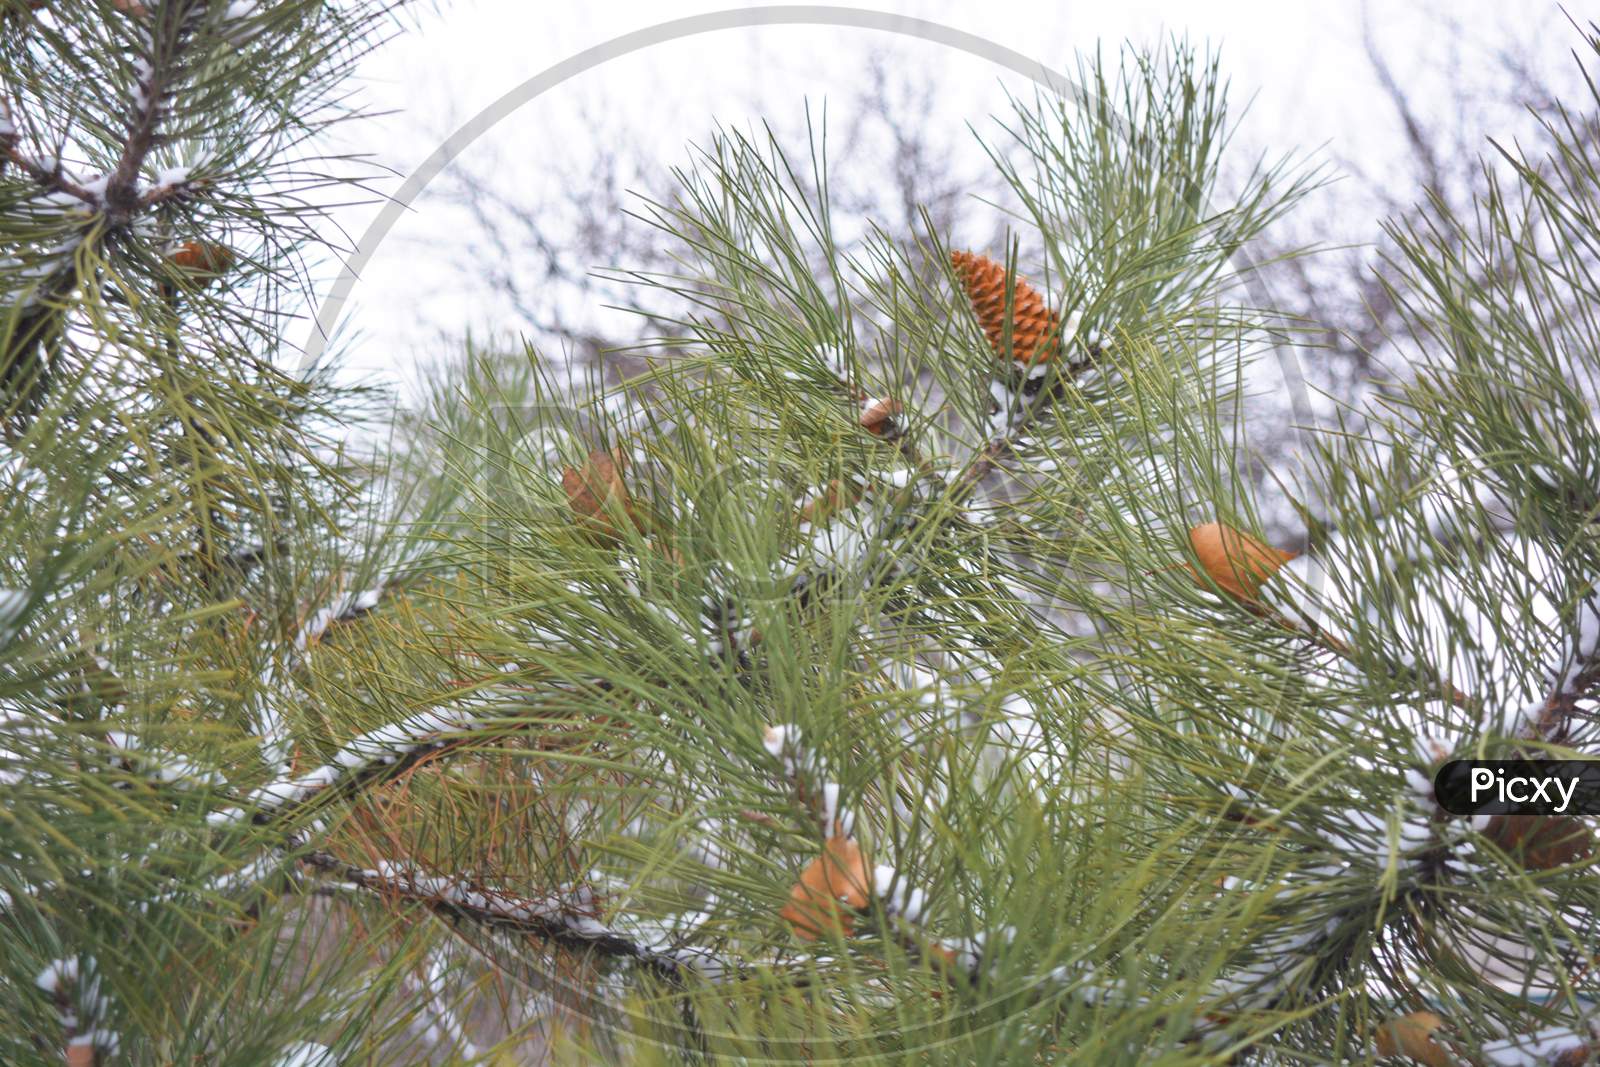 Brown fir-tree cones grow on branches of noble pine covered with white snow in December.